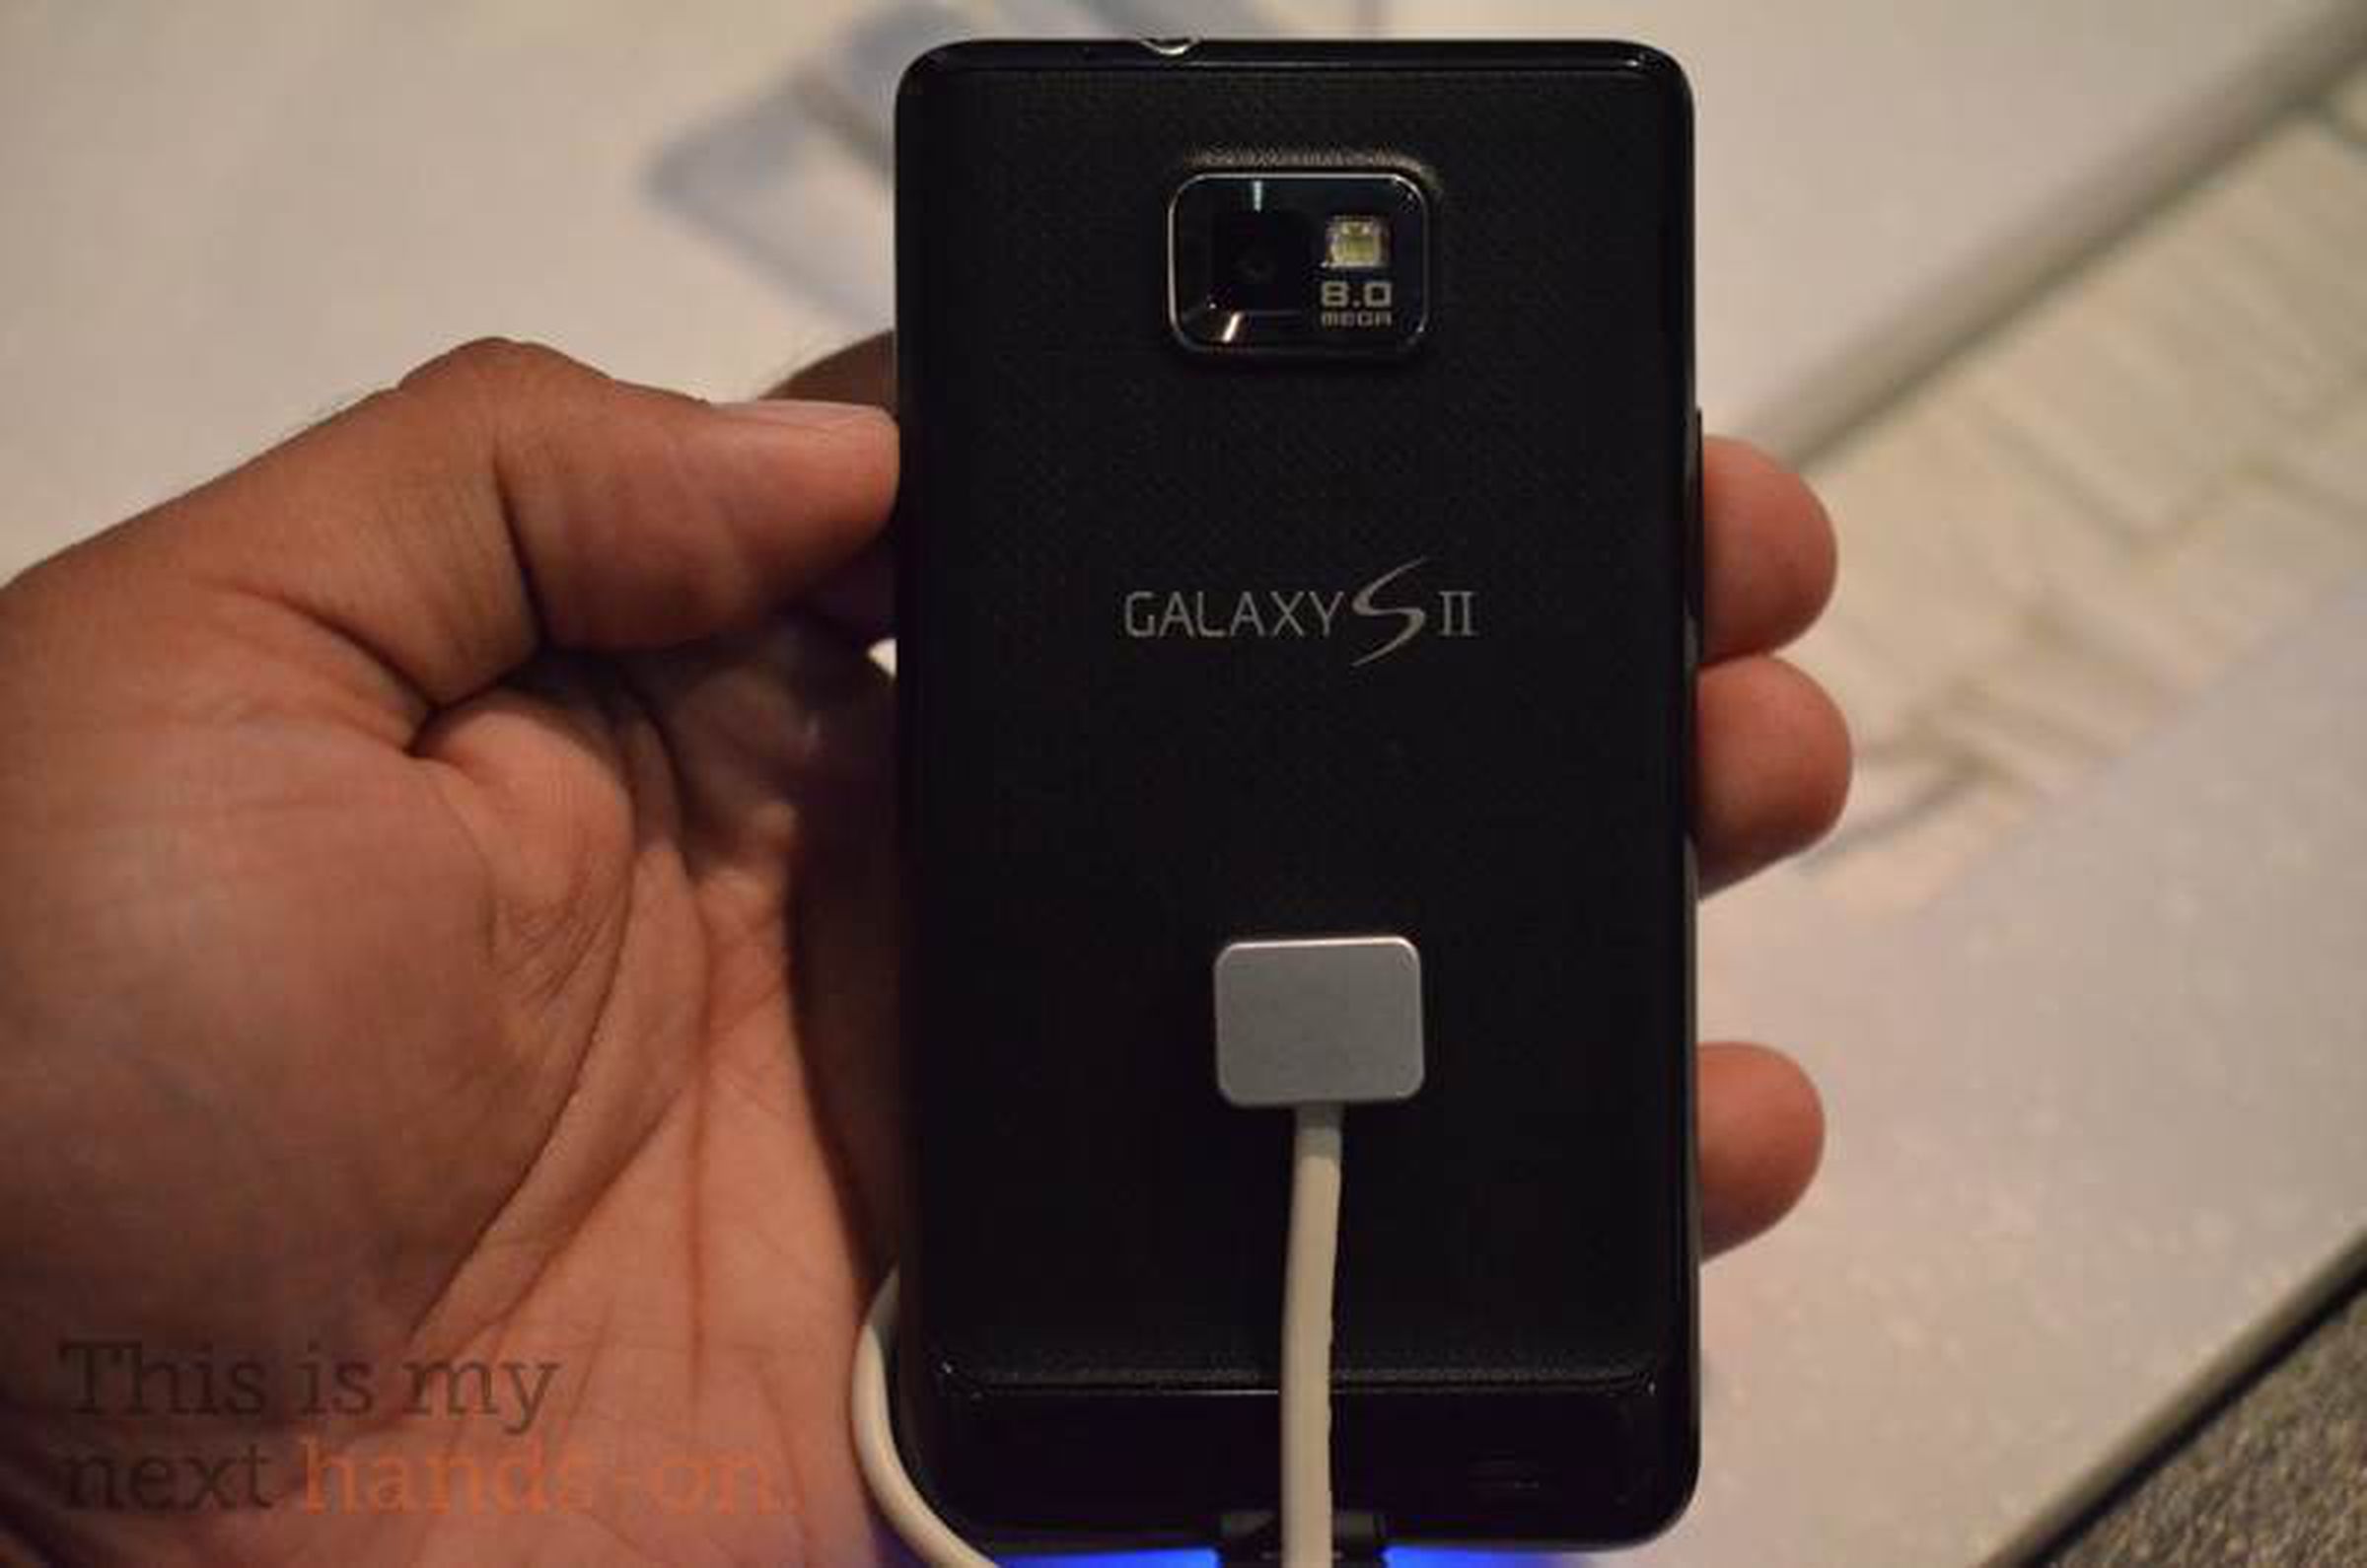 Samsung Galaxy S II on AT&T: 4.3-inch Super AMOLED Plus screen, available ‘in the coming weeks’ — Hands-on pictures!